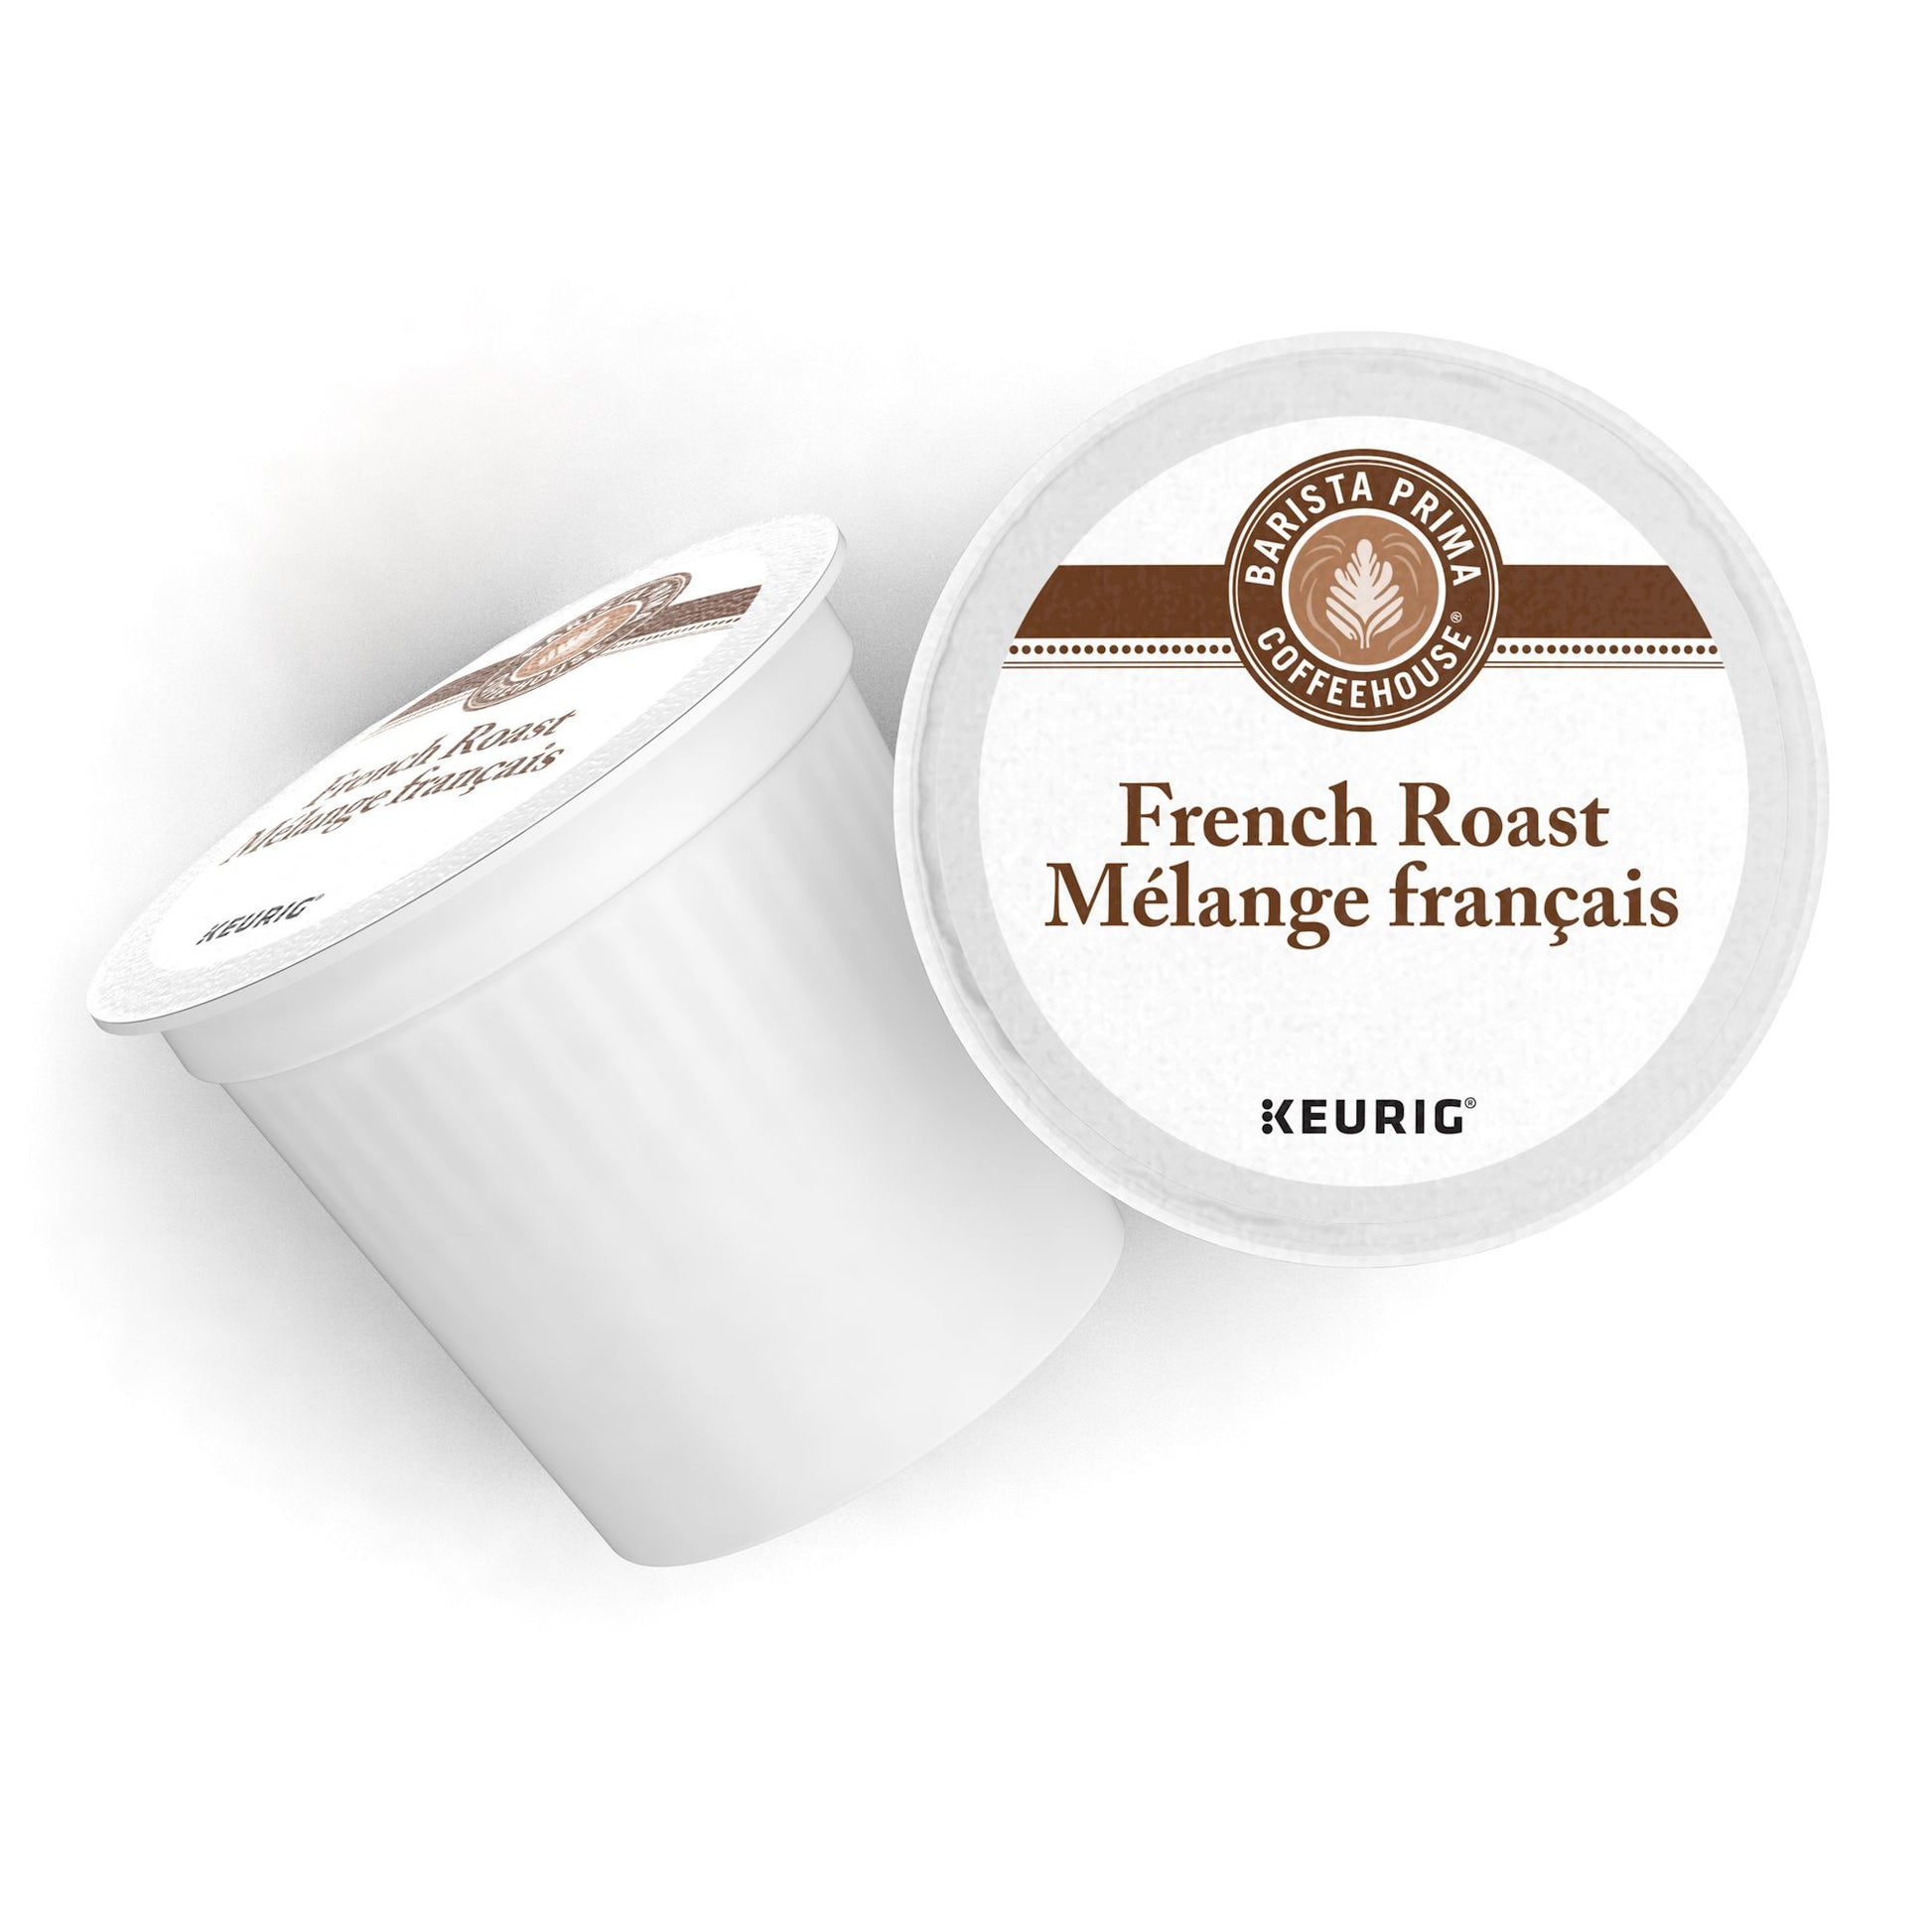 Barista Prima French Roast Coffee Keurig K-Cups, 24 Count – COFFEE-19